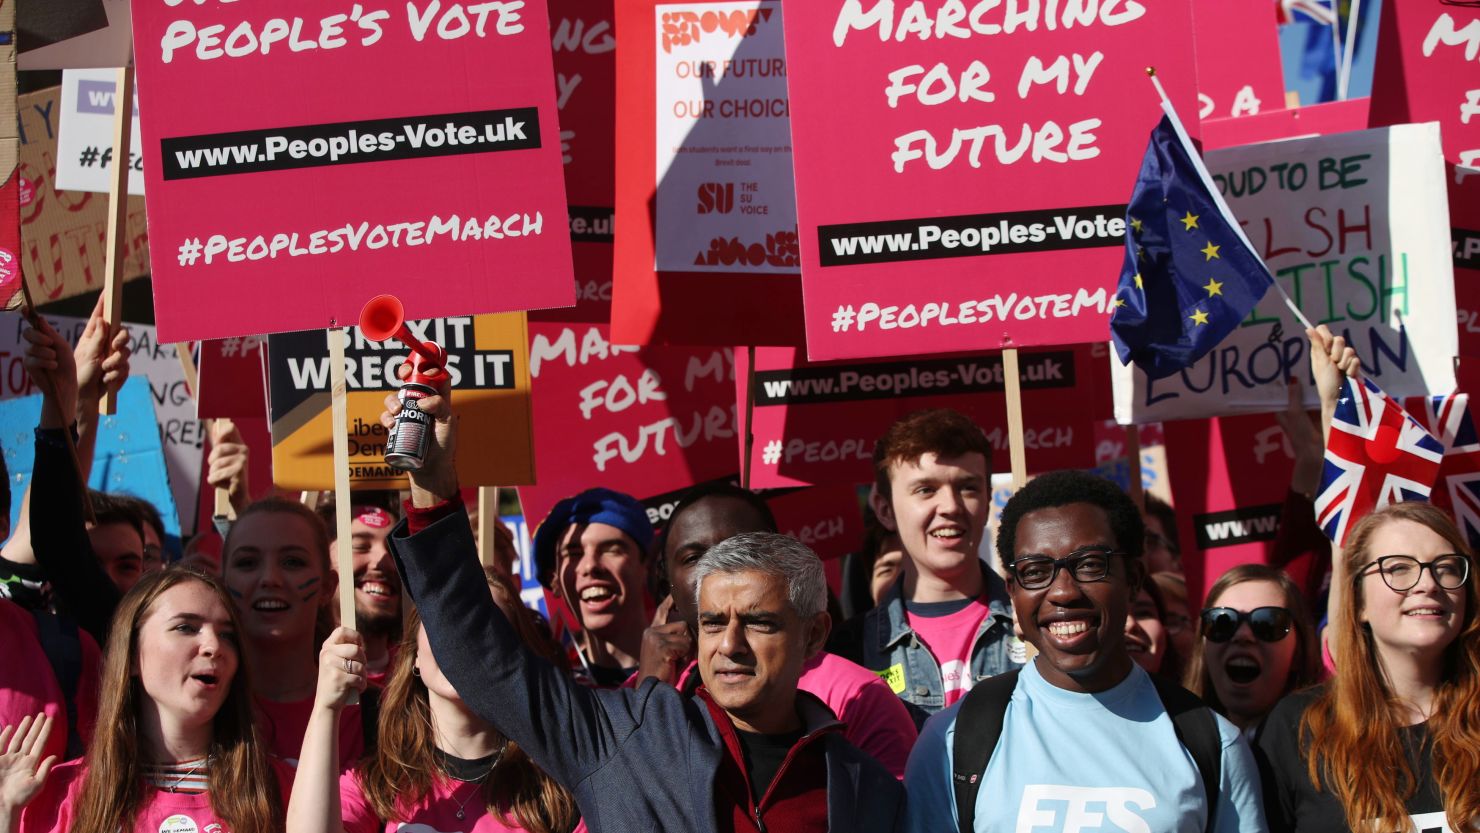 London Mayor Sadiq Khan, front center, holds a klaxon horn as he joins protesters in the People's Vote March for the Future on Saturday.